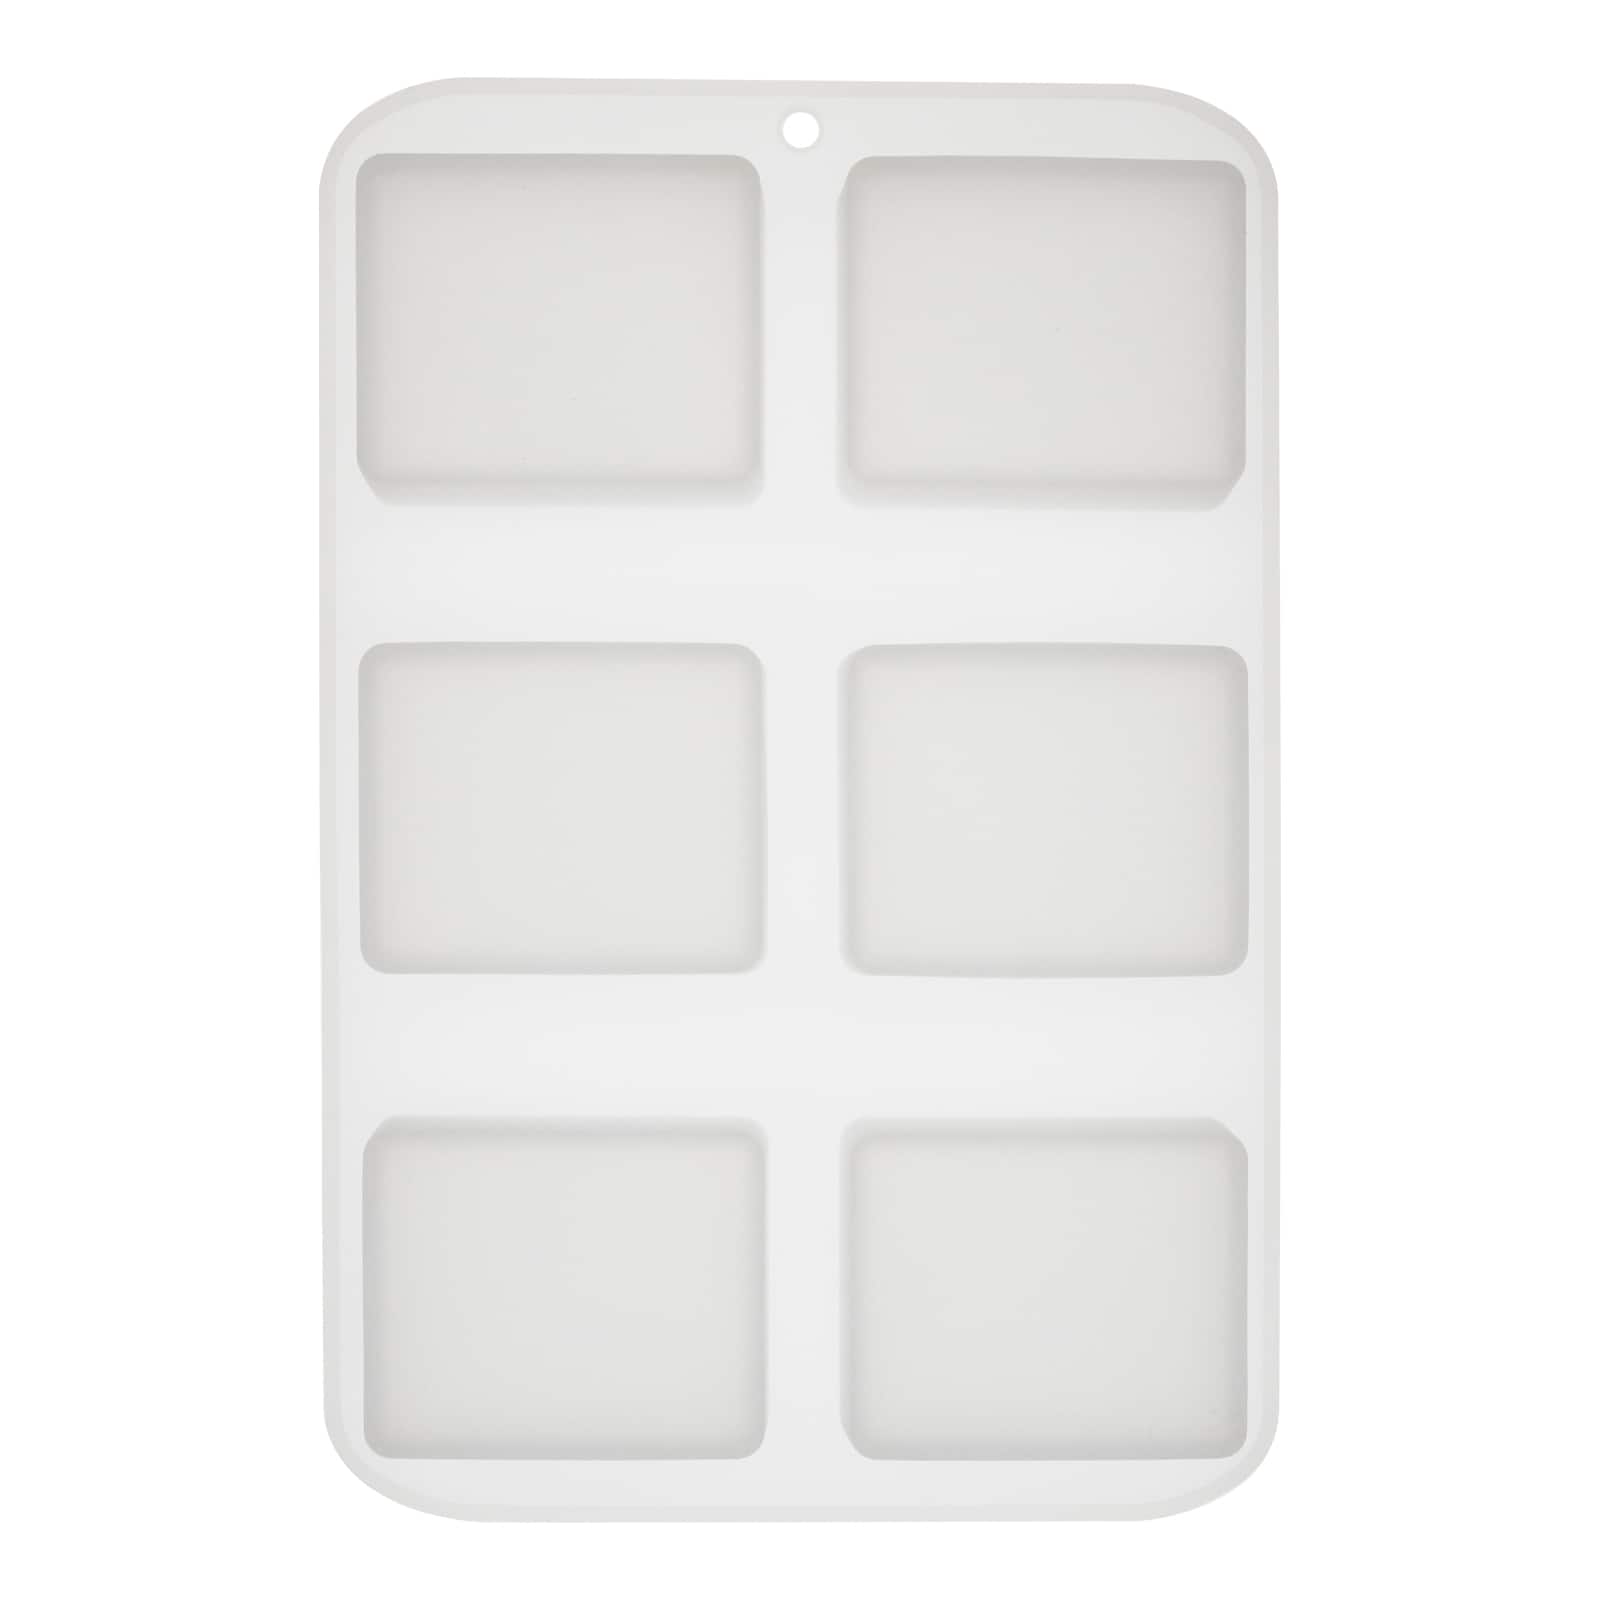 Silicone Rectangle Soap Mold by Make Market®